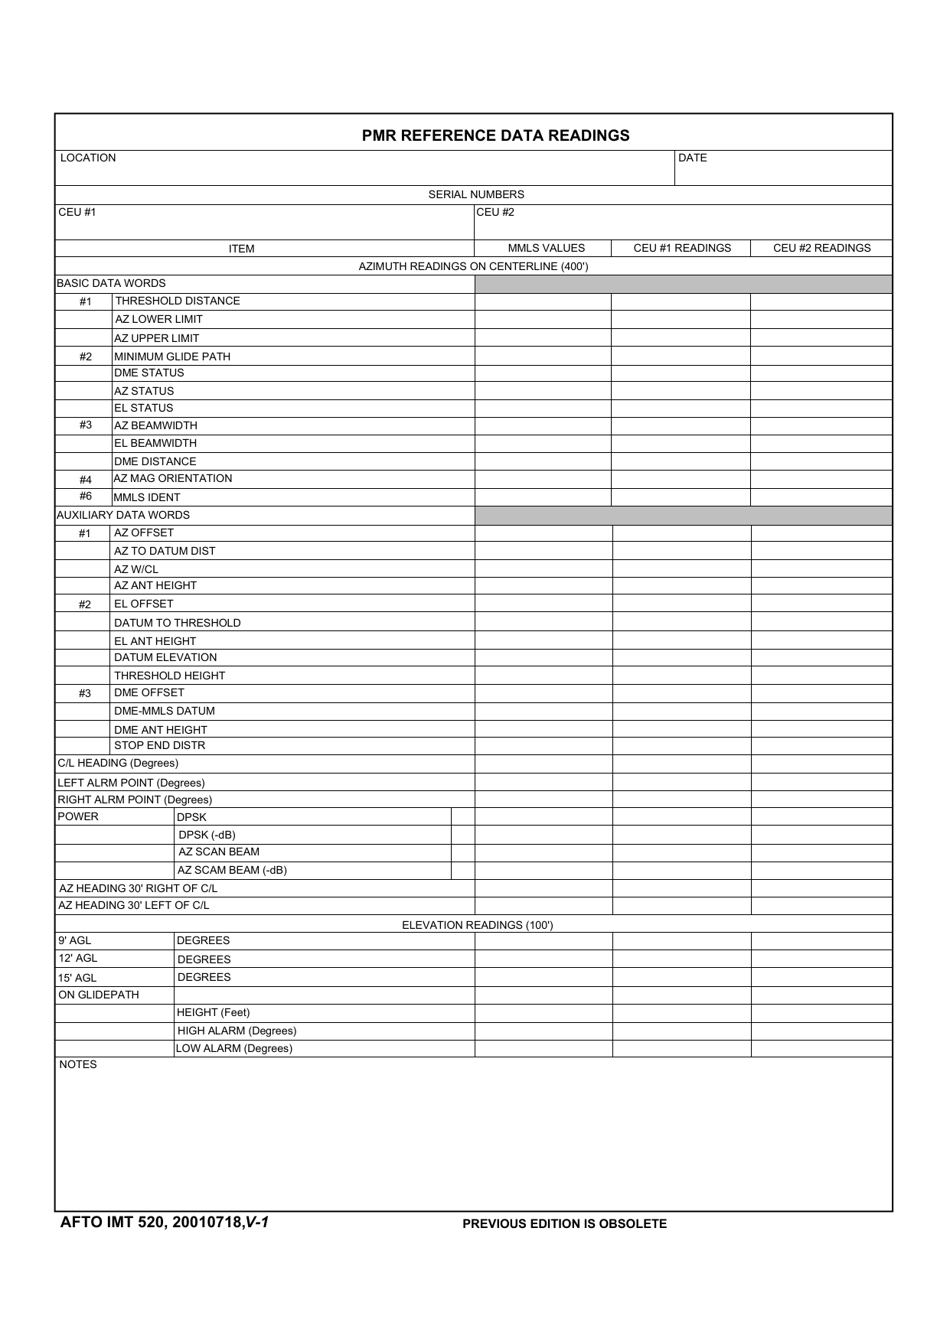 AFTO IMT Form 520 Pmr Reference Data Readings, Page 1